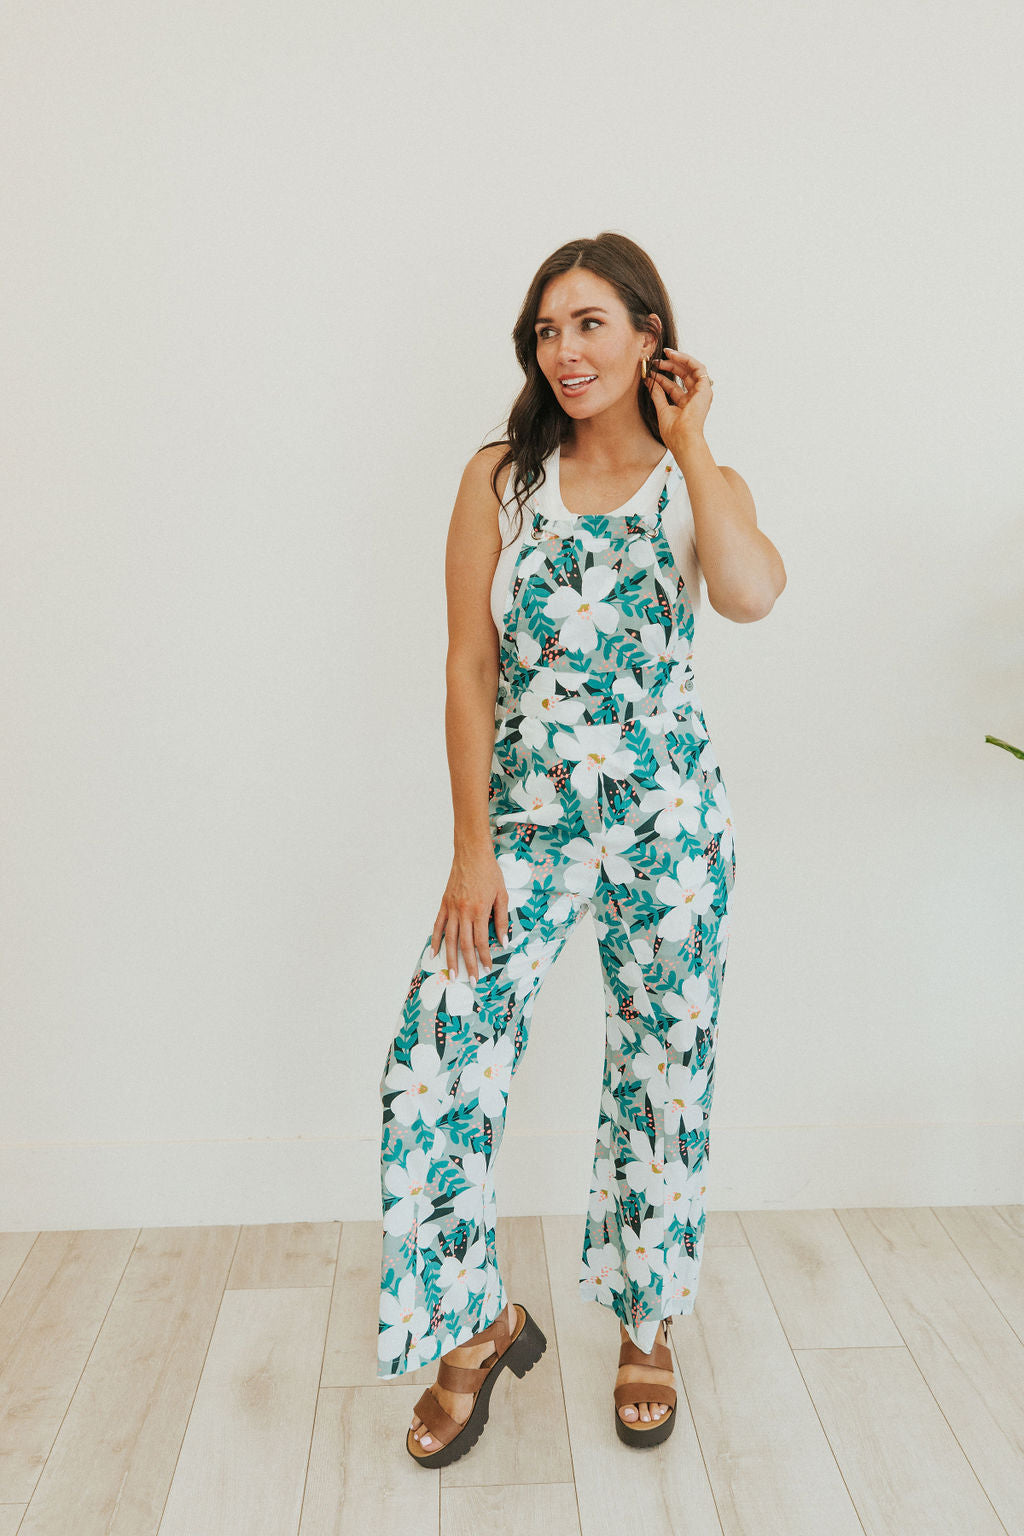 No Surprise Here Floral Overalls